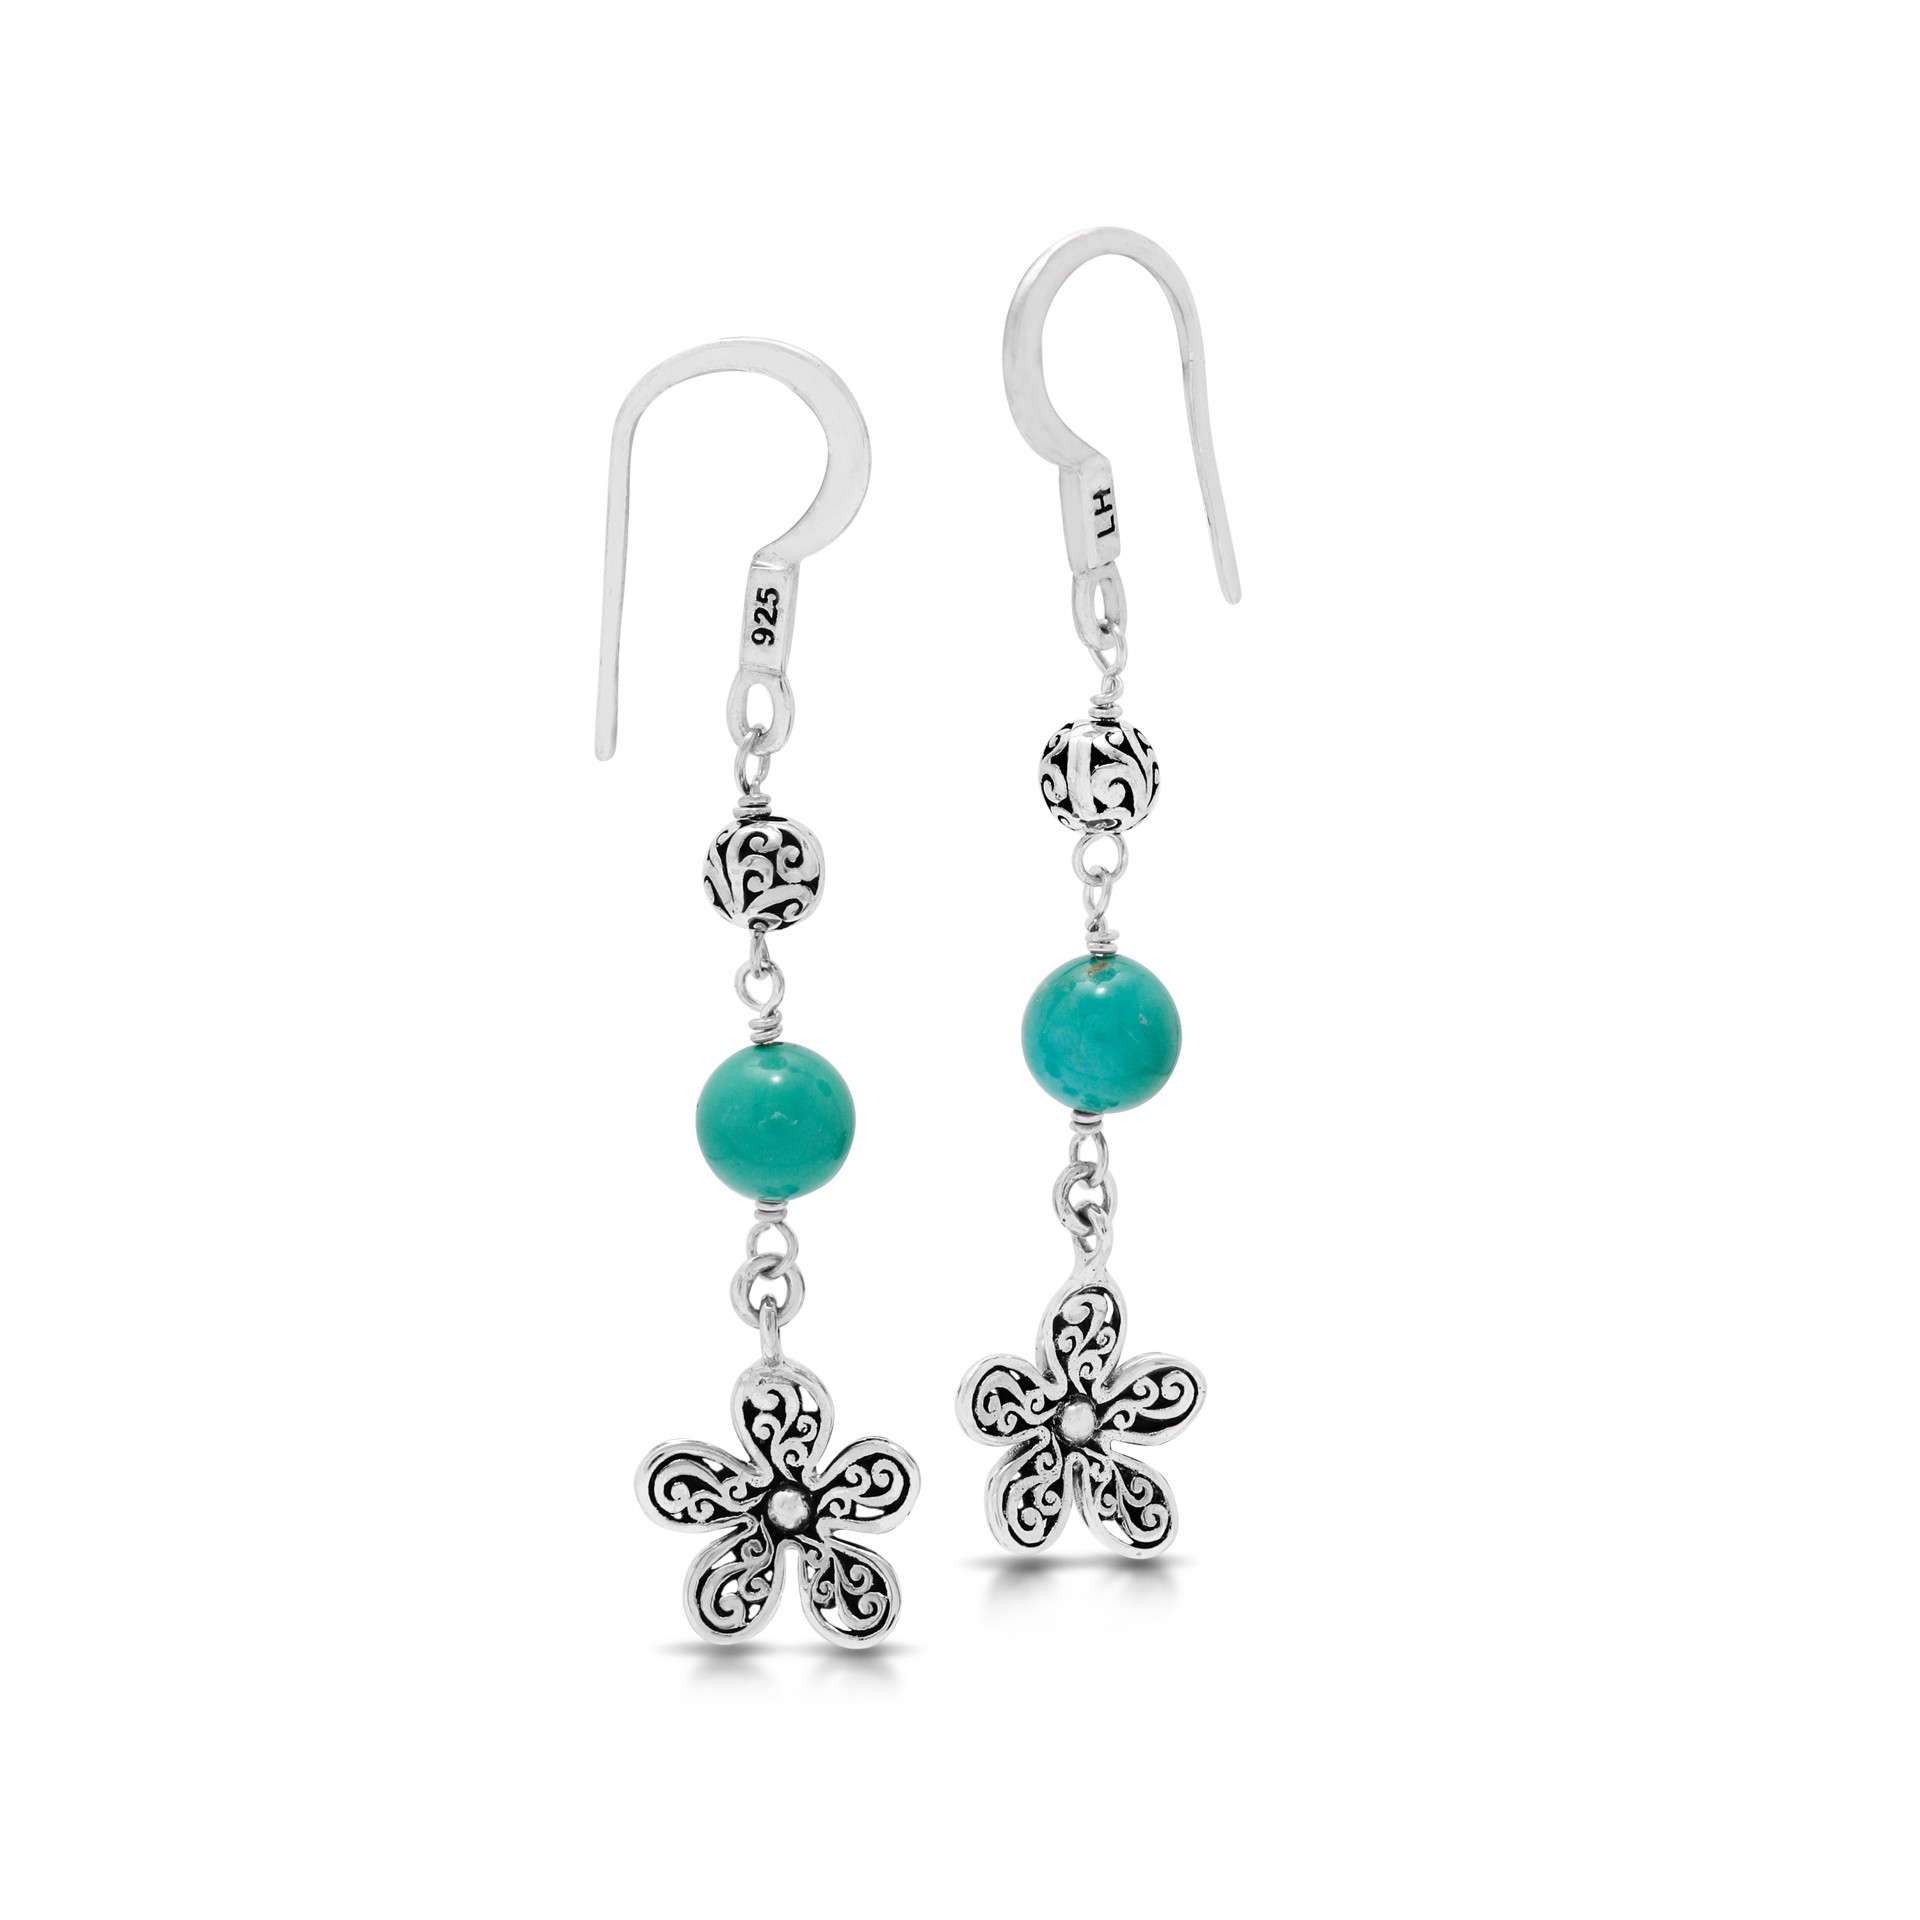 9676 Scroll Flower Charms Blue Turquoise Drop Earrings by Lois Hill